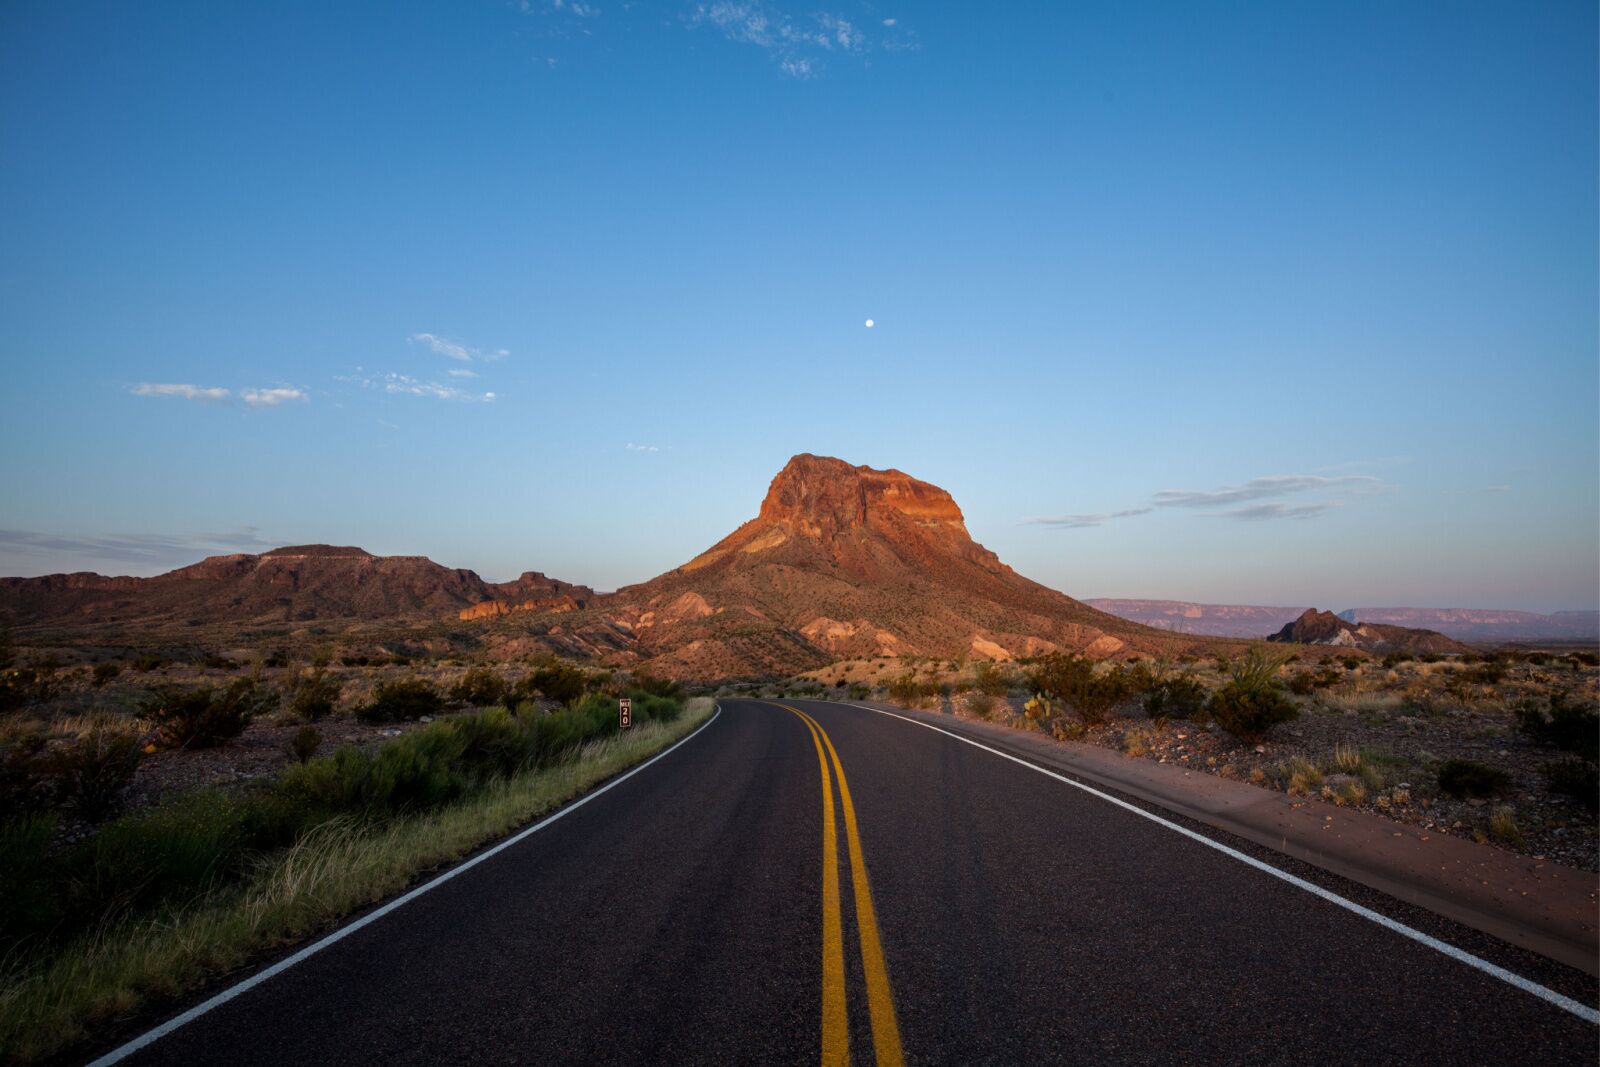 Maxwell scenic drive - a good place to drive on a big bend national park road trip